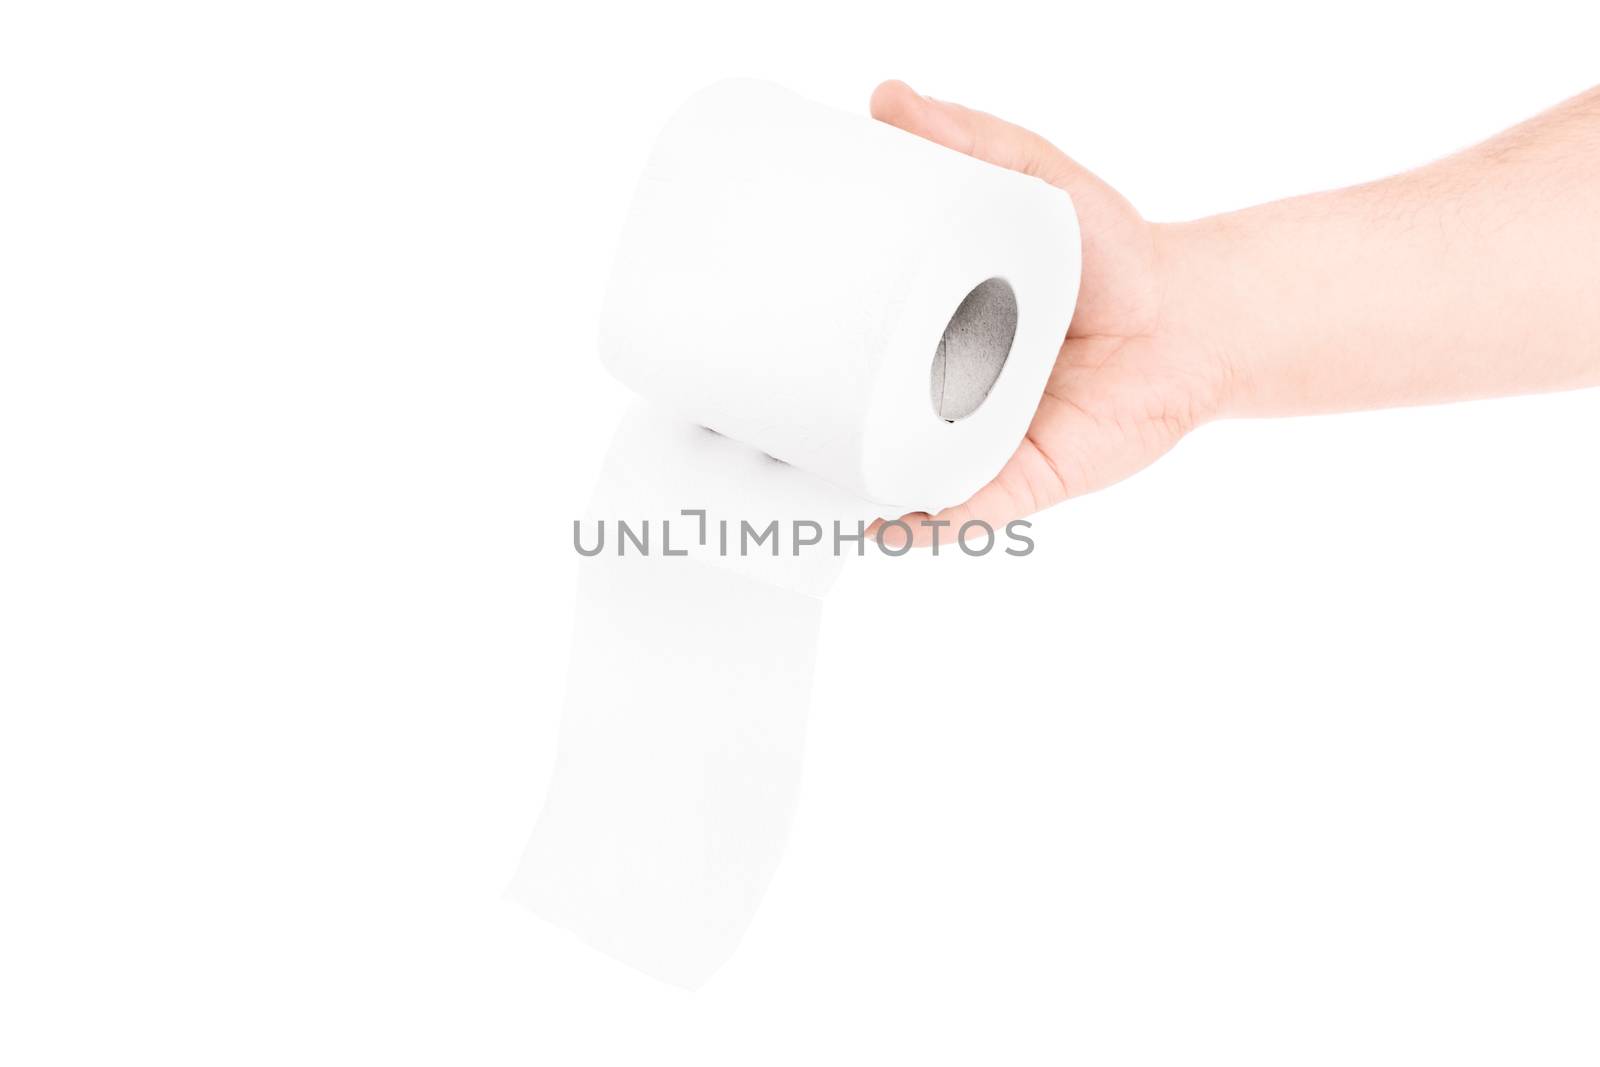 Handing out toilet paper by Mendelex